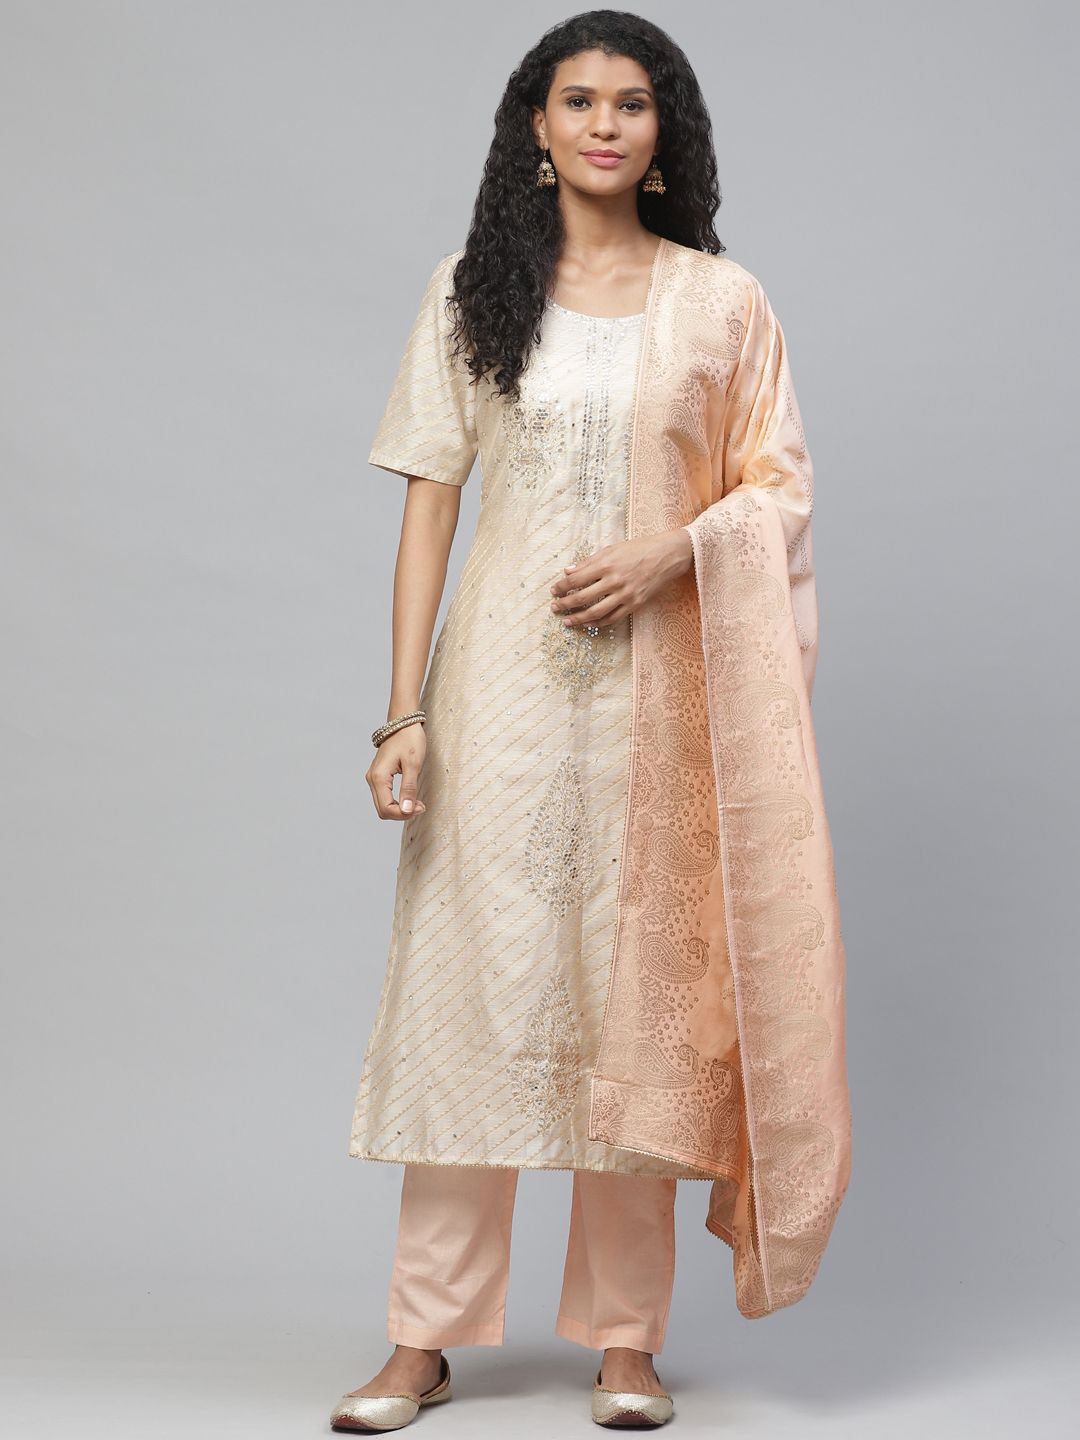 Readiprint Fashions Beige & Peach-Coloured Mirror Work Unstitched Dress Material Price in India